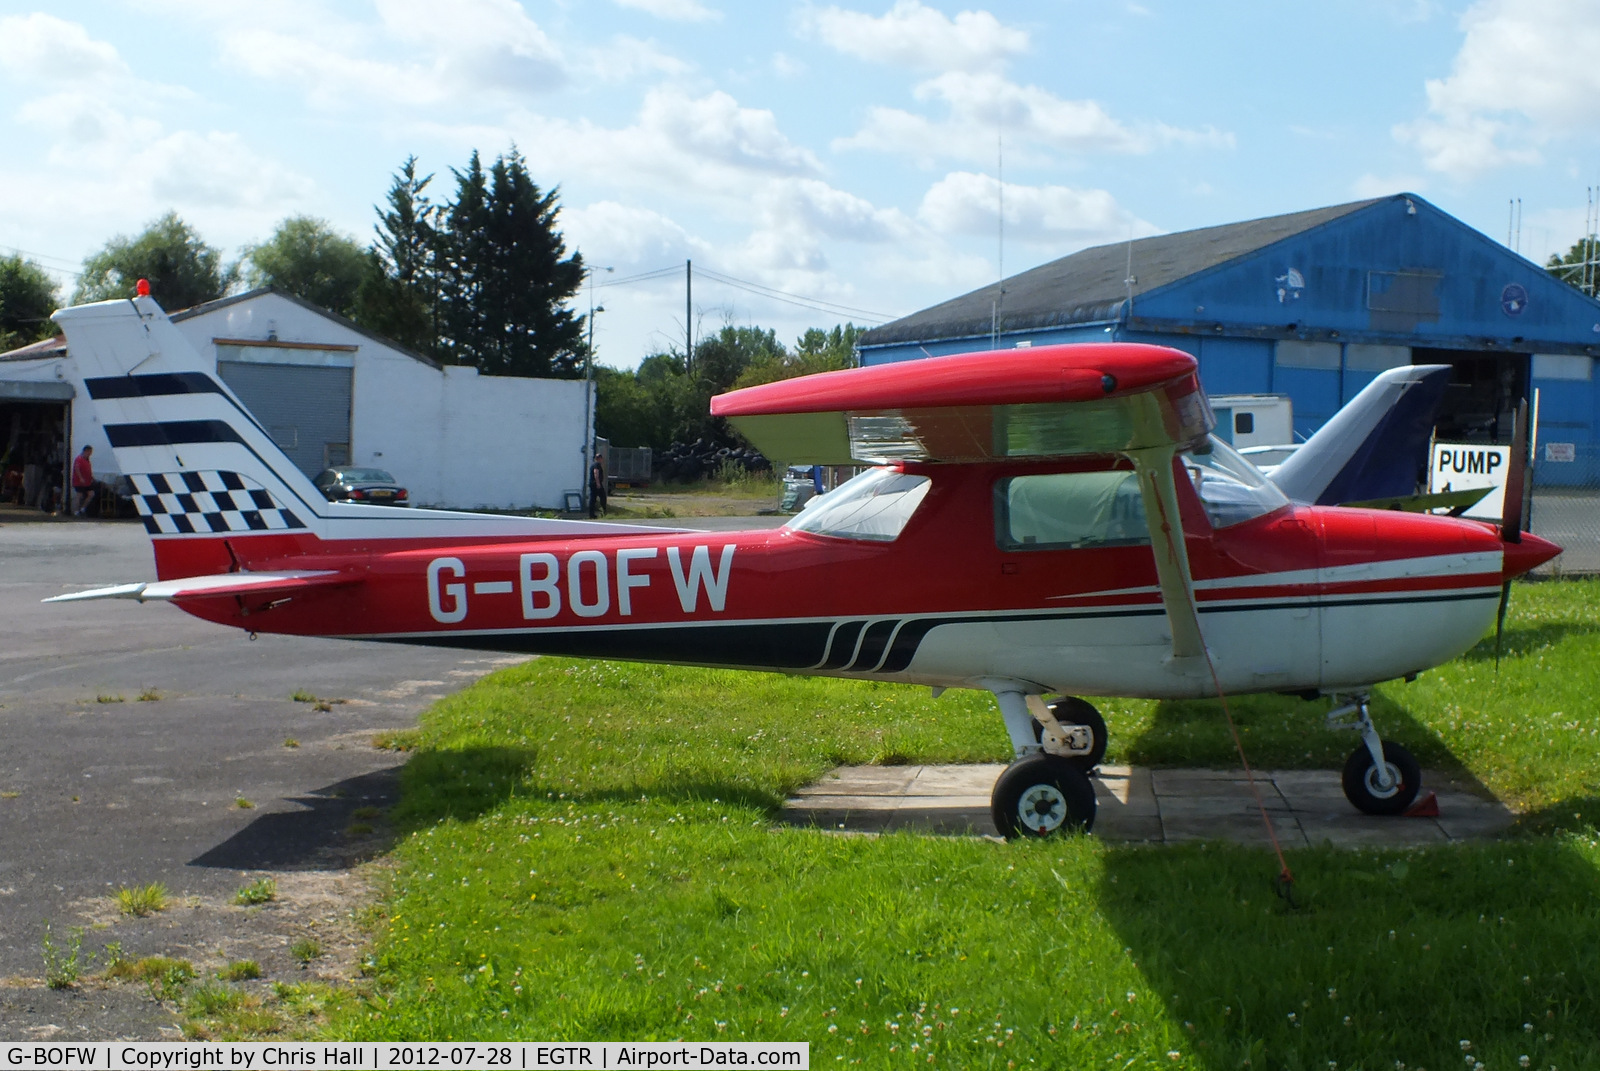 G-BOFW, 1975 Cessna A150M Aerobat C/N A150-0612, privately owned